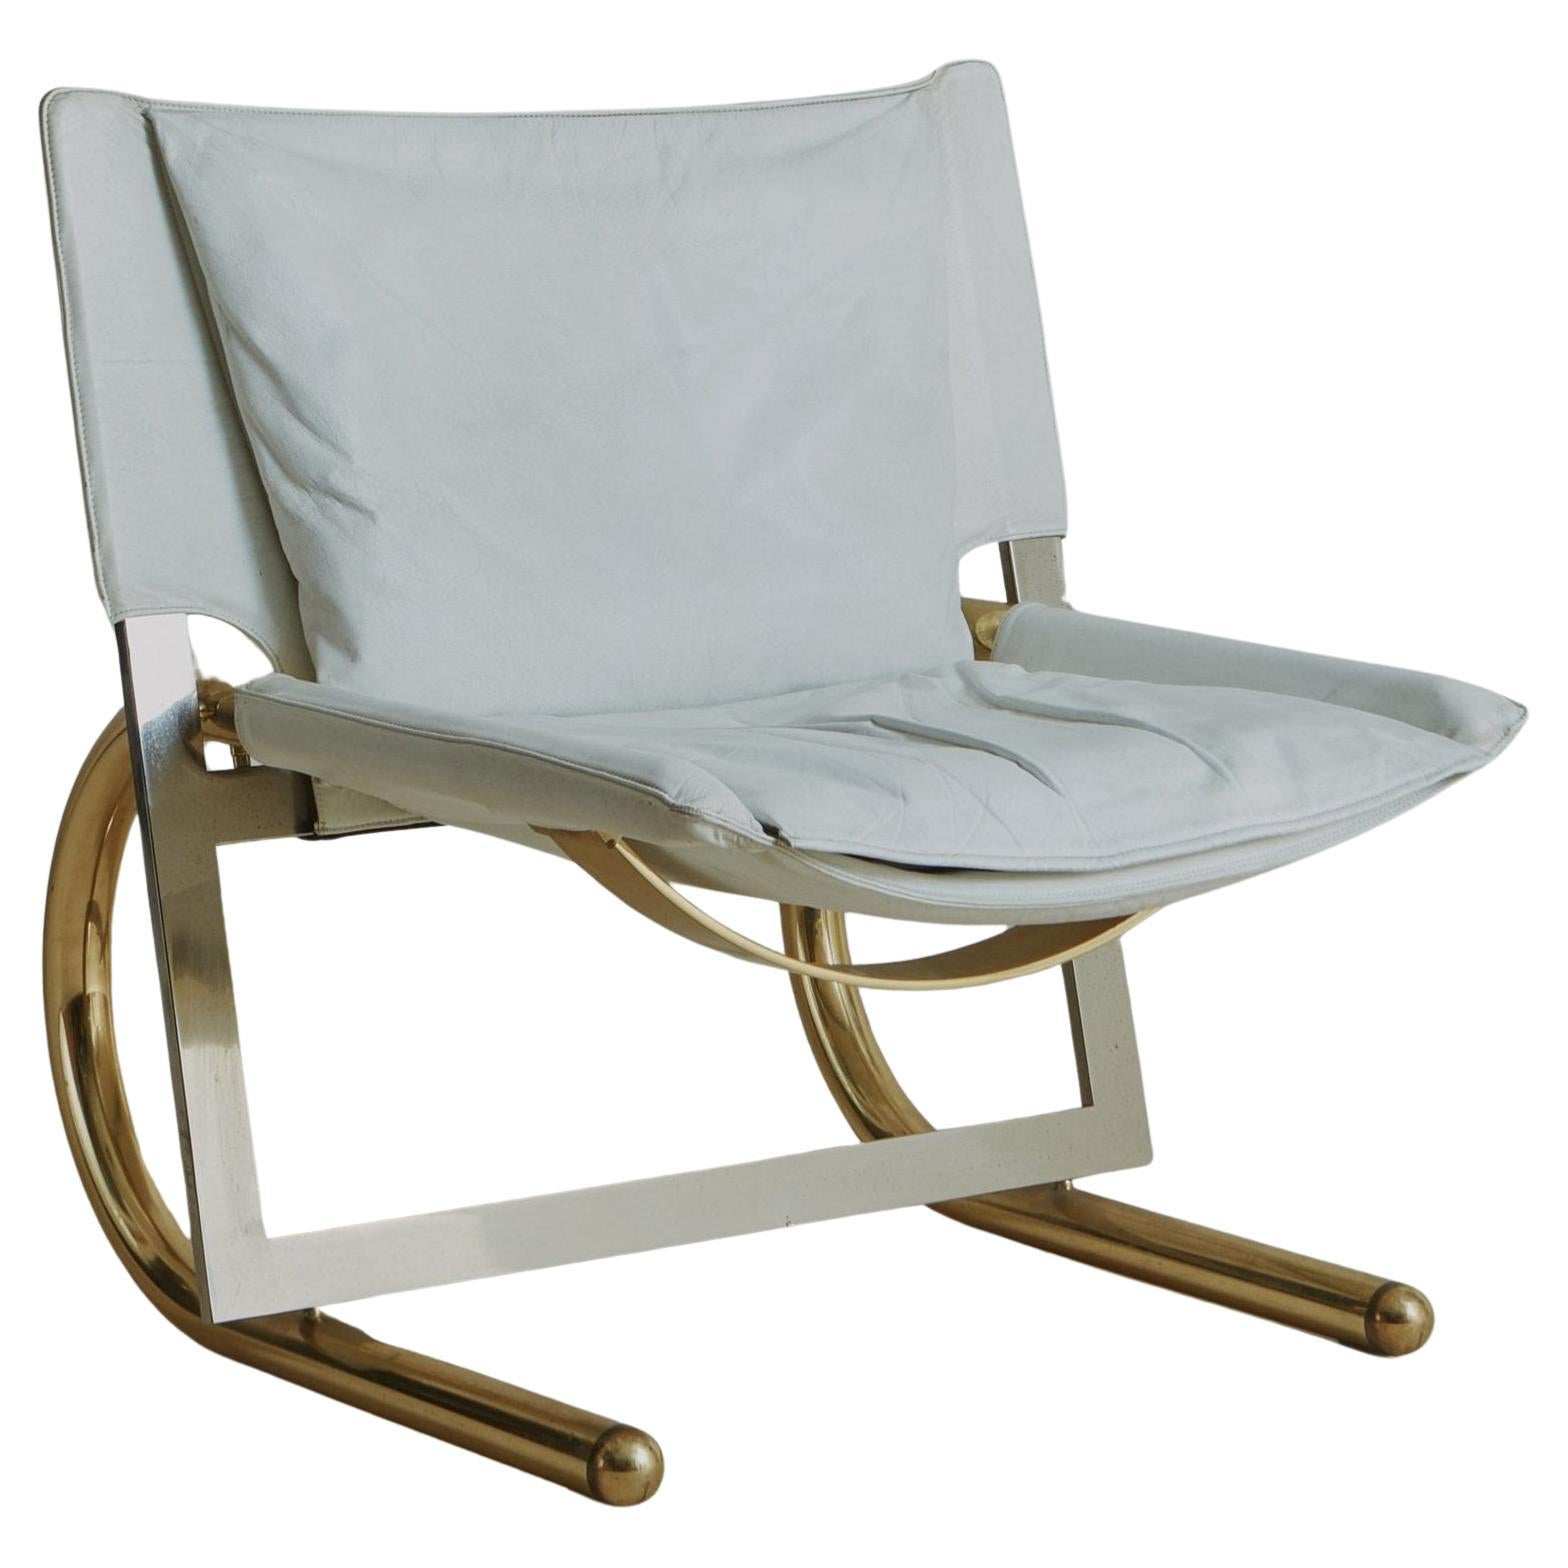 Curved Brass Frame Sling Chair in Original White Leather, Italy 1970s For Sale